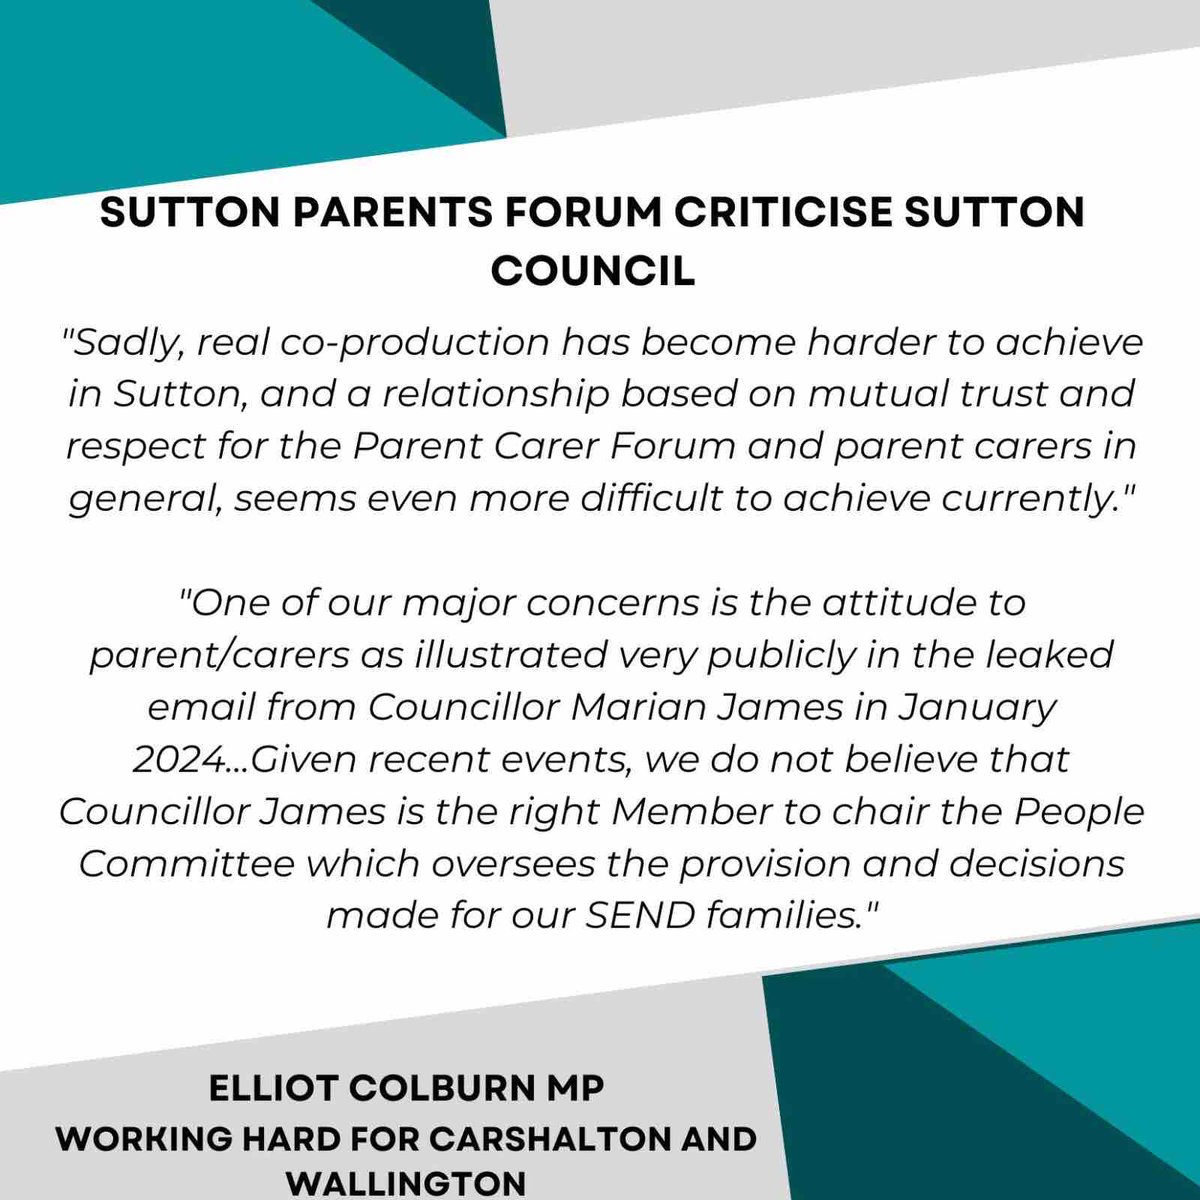 Absolutely shocking to hear Sutton Council’s attitude made it impossible for Sutton Parents Forum to work with them. Disgraceful that our local Council are making the lives of parents even harder!